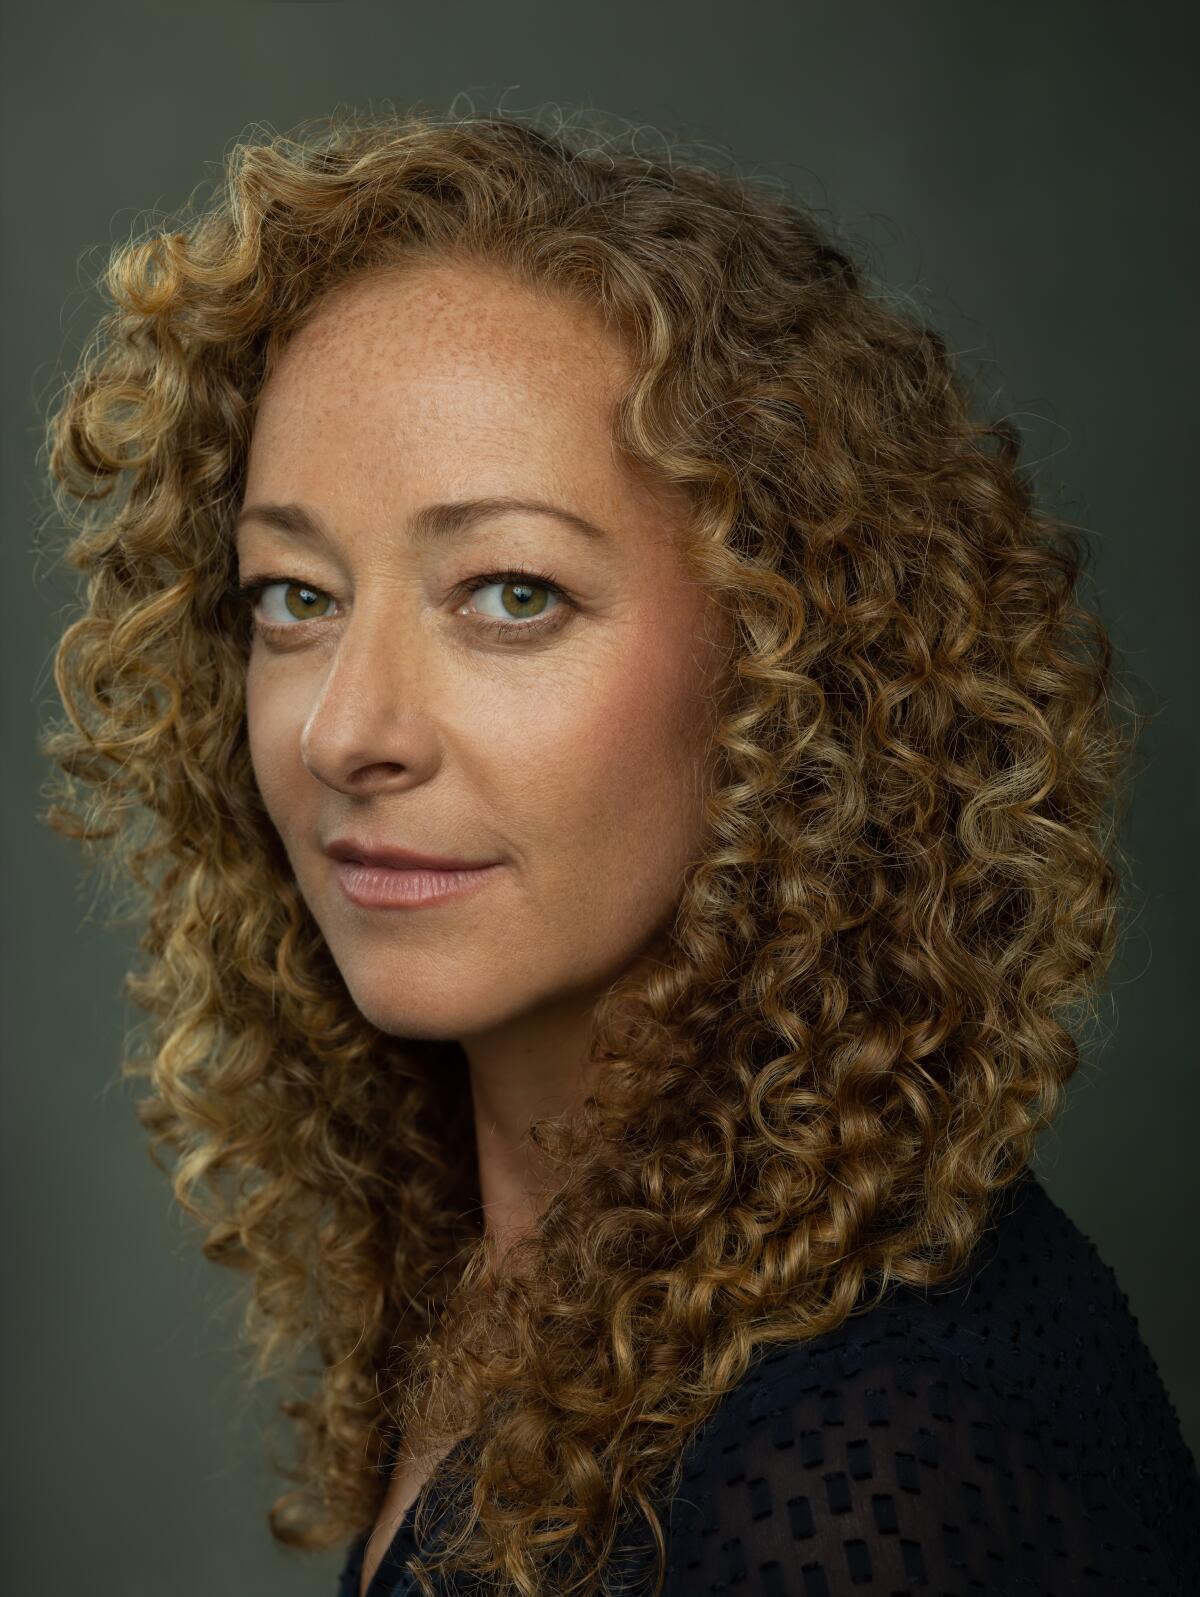 An author in profile with very curly dark blonde hair wearing black against a gray background.`